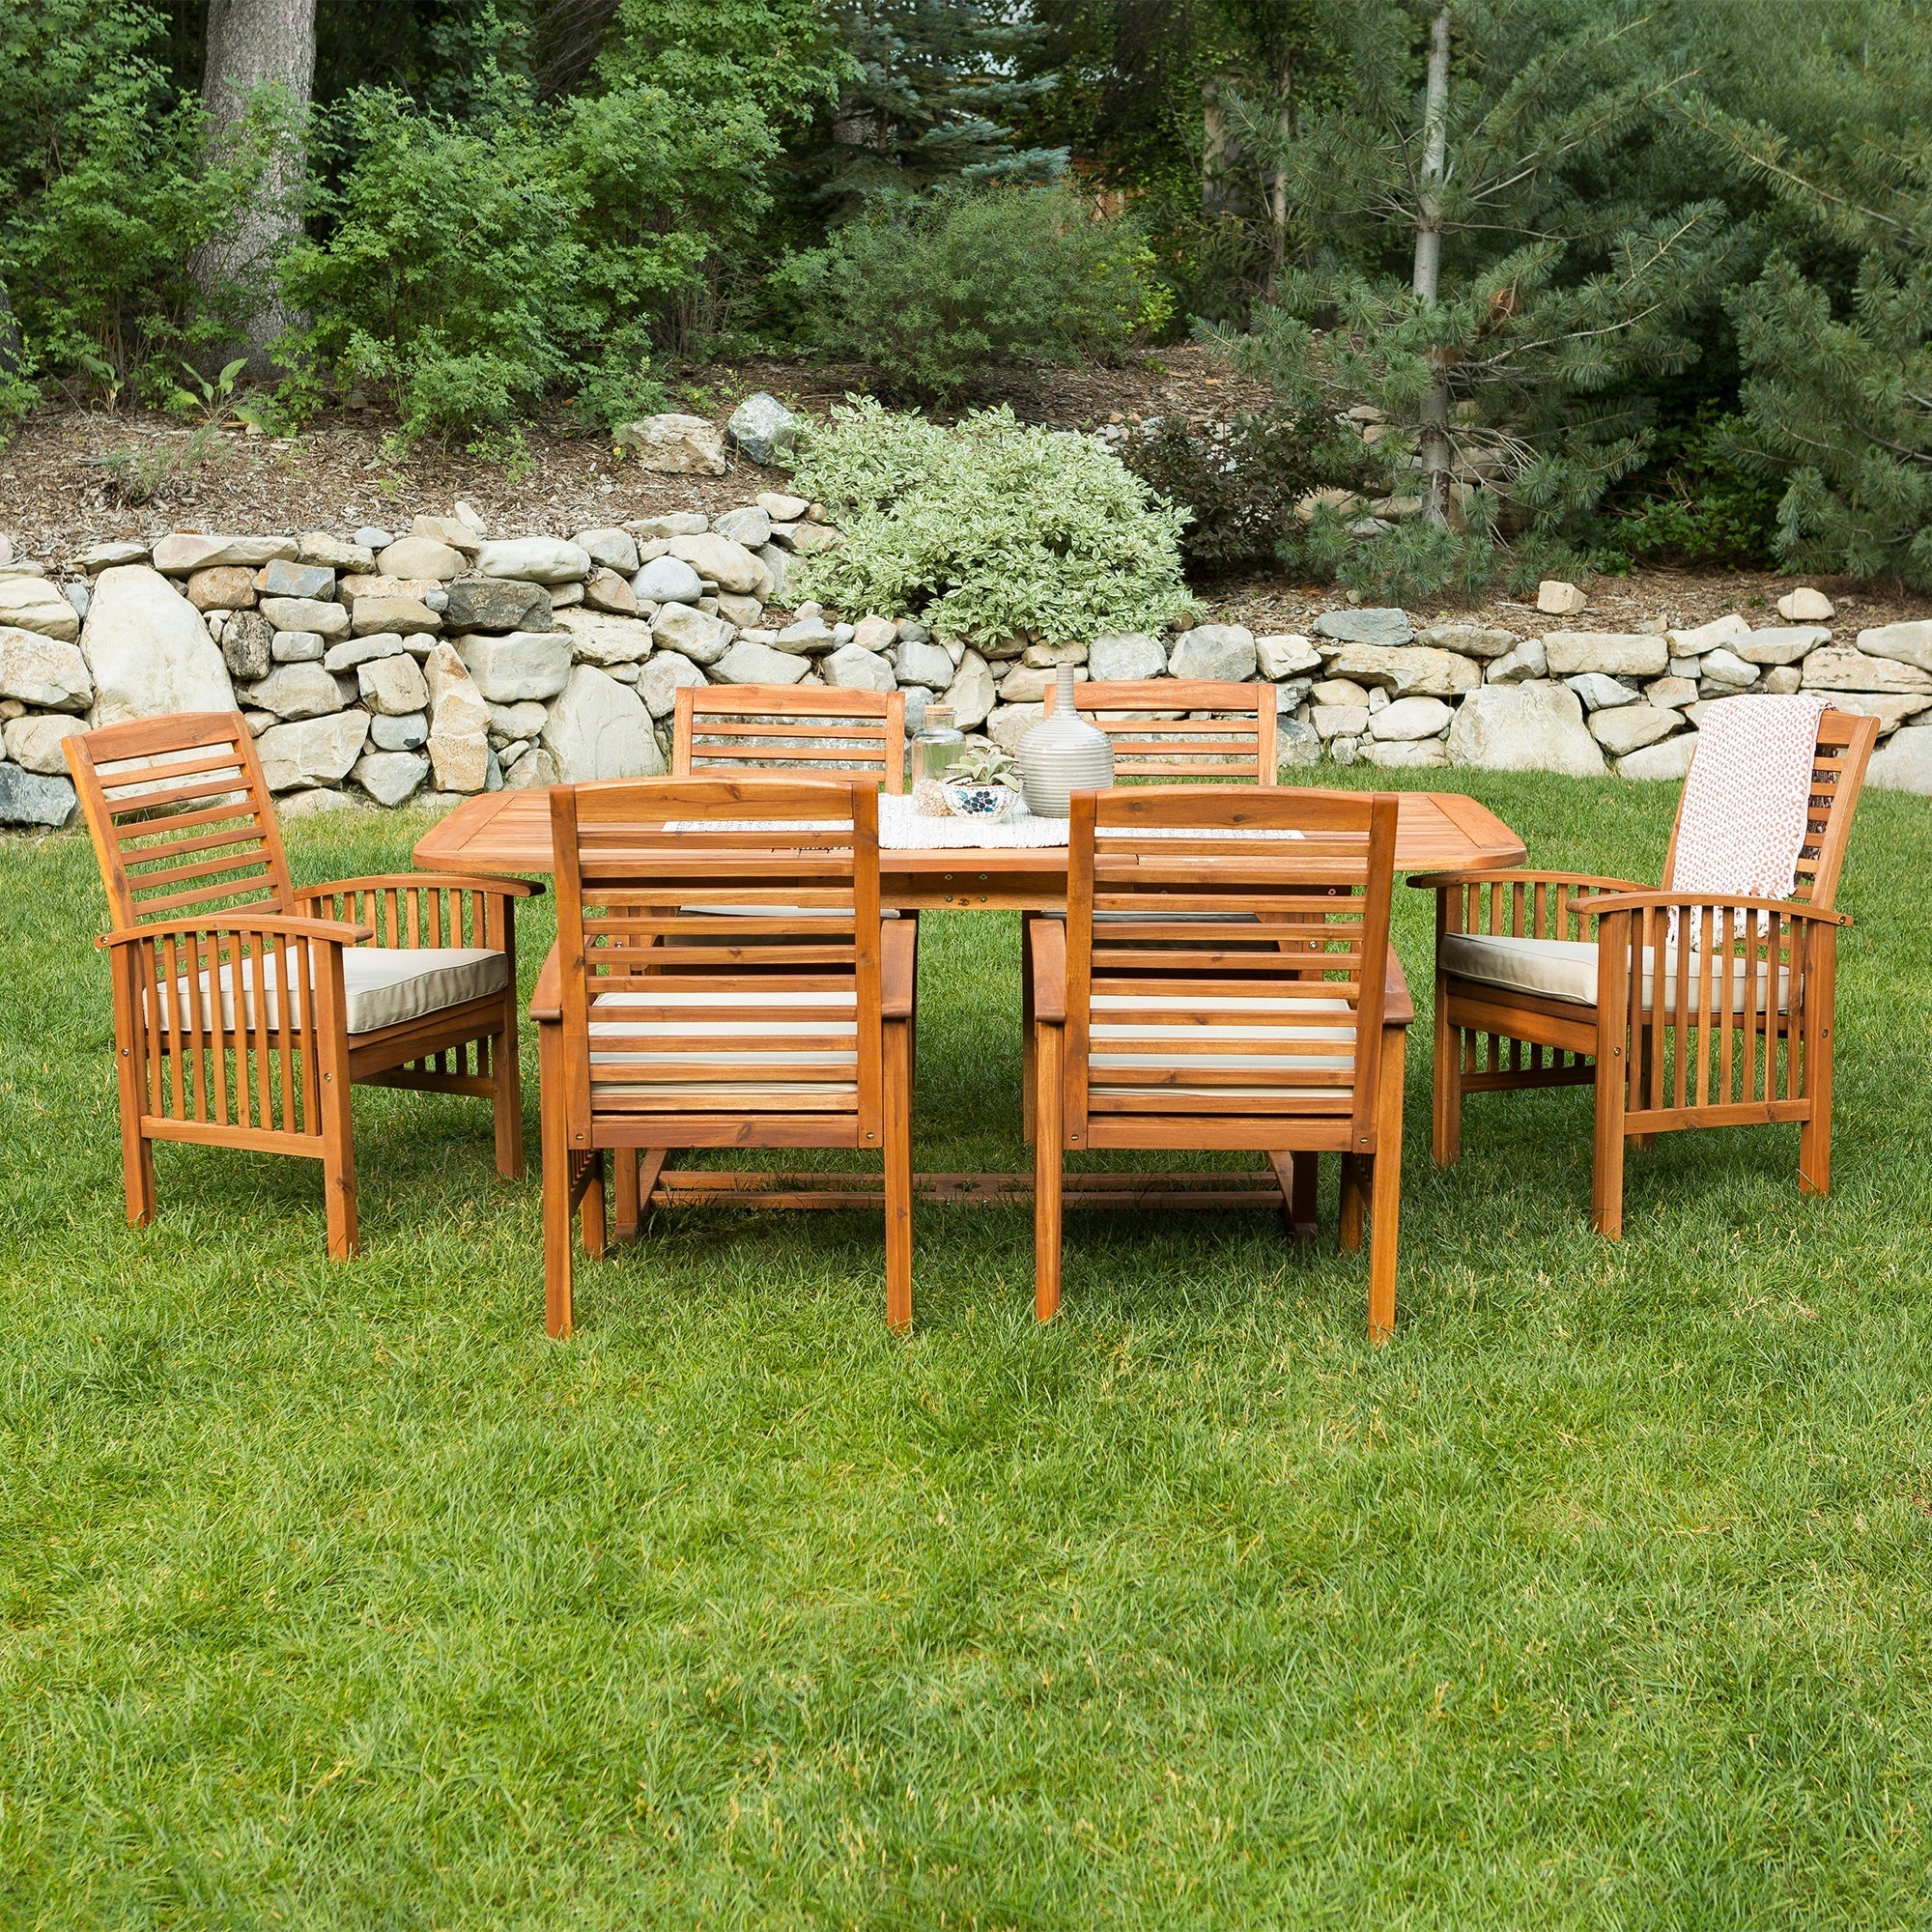 Walker Edison Midland 7-Piece Outdoor Patio Dining Set with Cushions